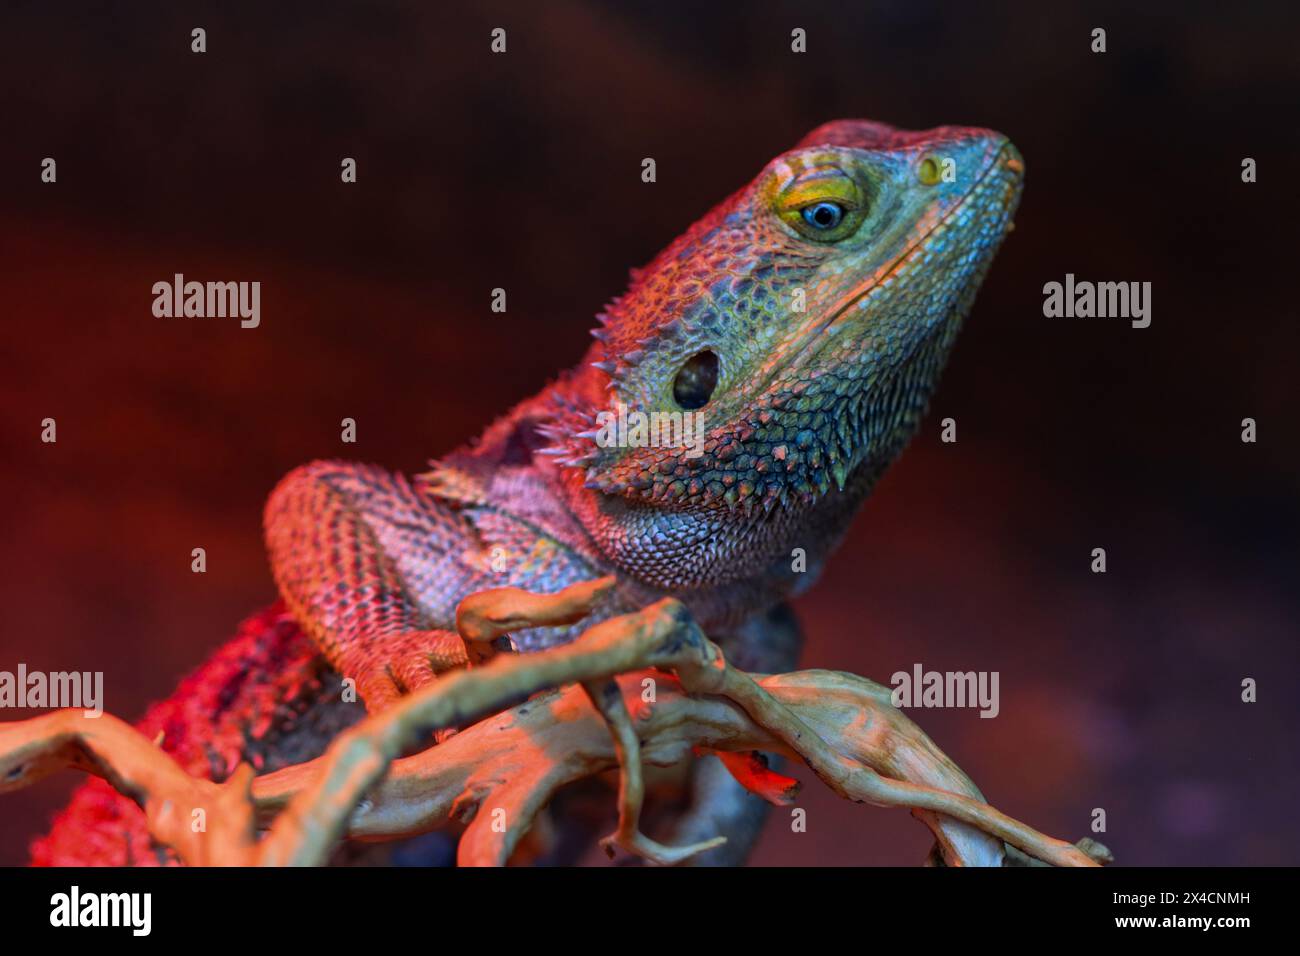 Captured in stunning detail, this image showcases the intricate beauty of a lizard, a testament to the diversity of life in the natural world. Stock Photo